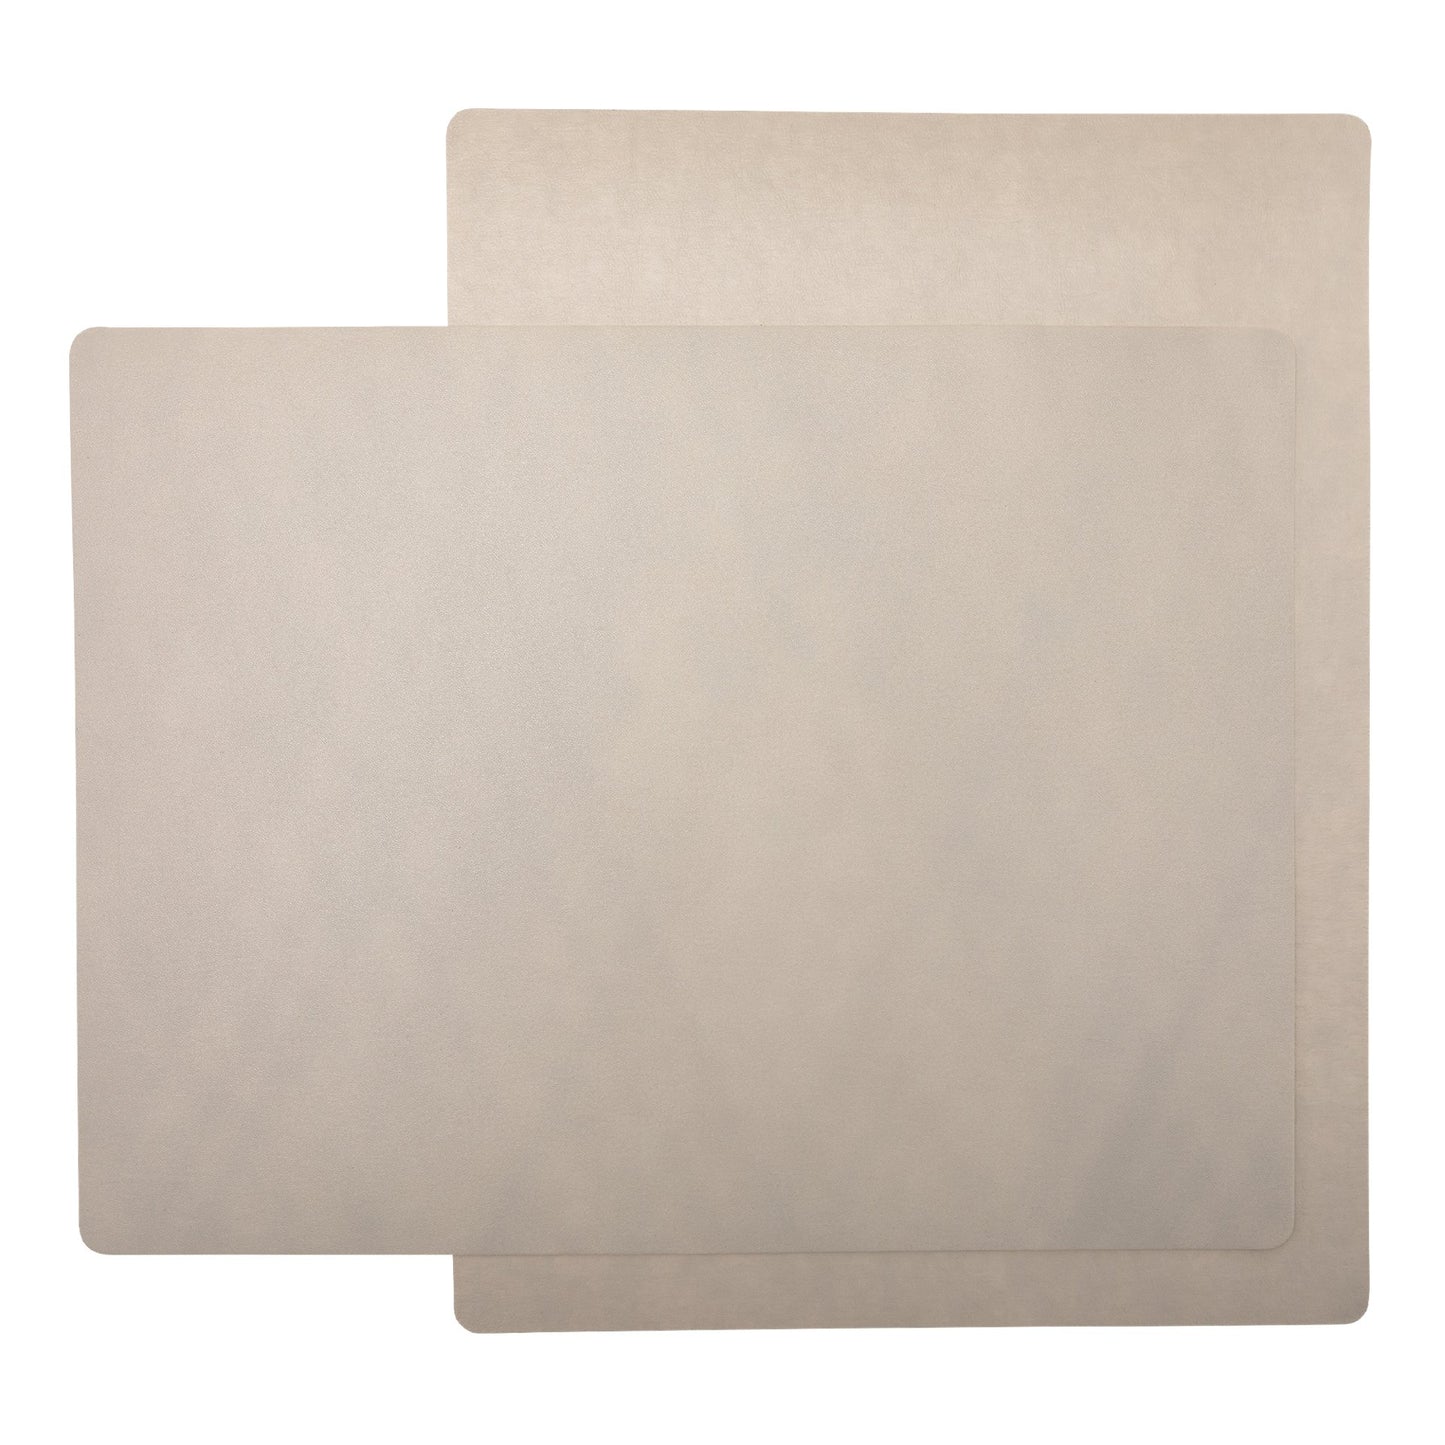 Two rectangular washable paper placemats are stacked one on top of the other, at contrasting angles. They are both beige.